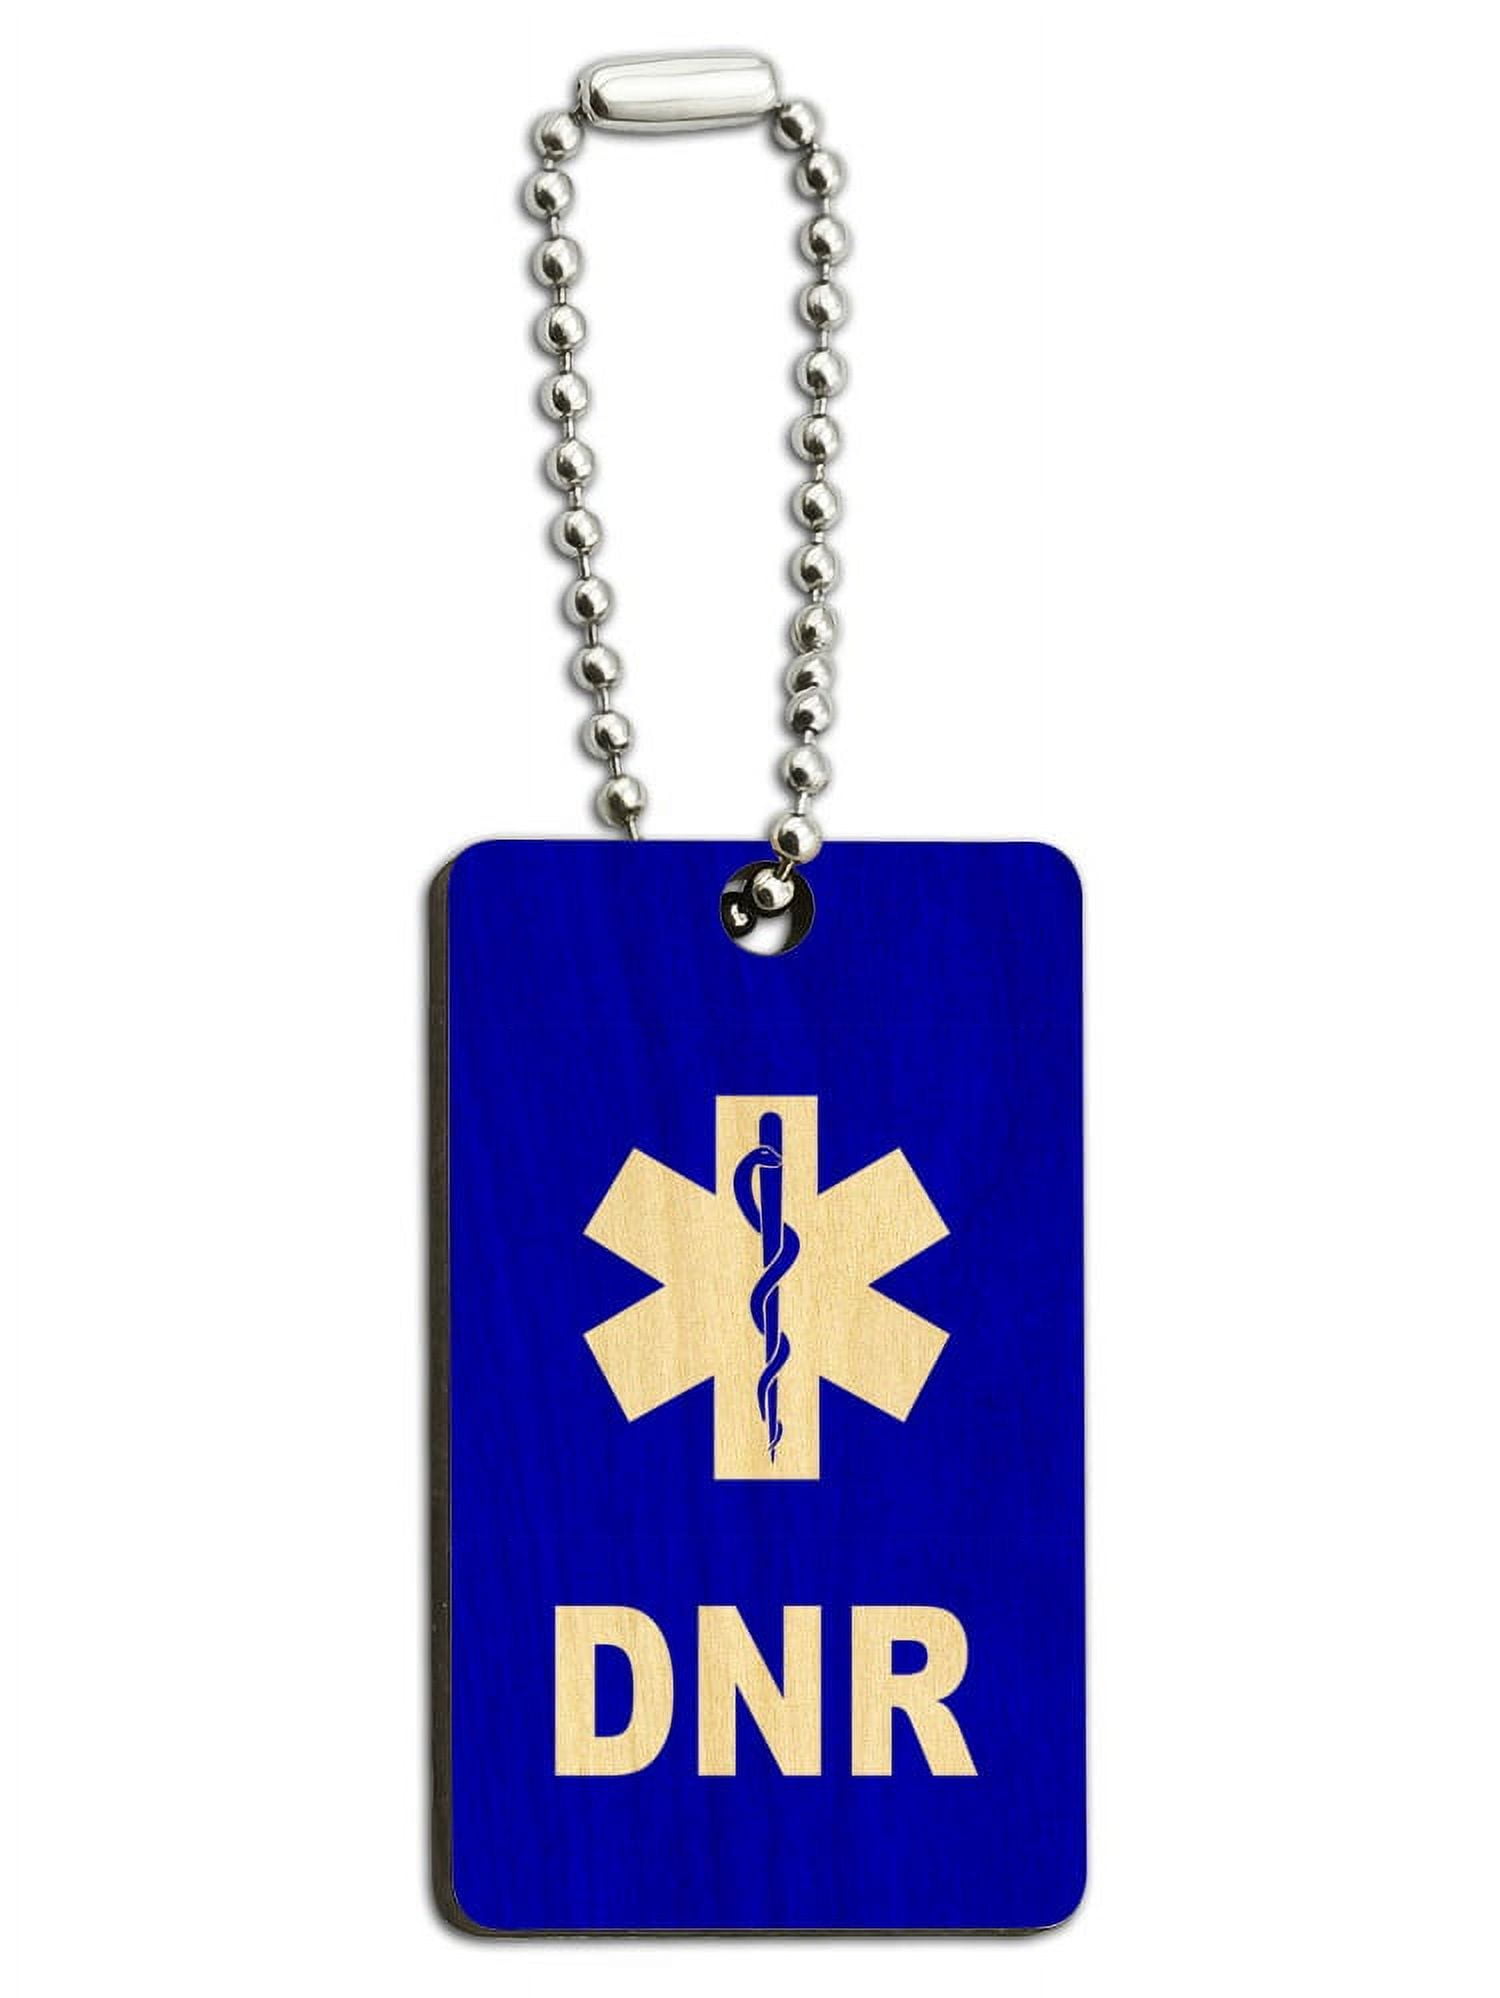 DNR Do Not Resuscitate - Medical Emergency - Star of Life Wood Rectangle Key  Chain 